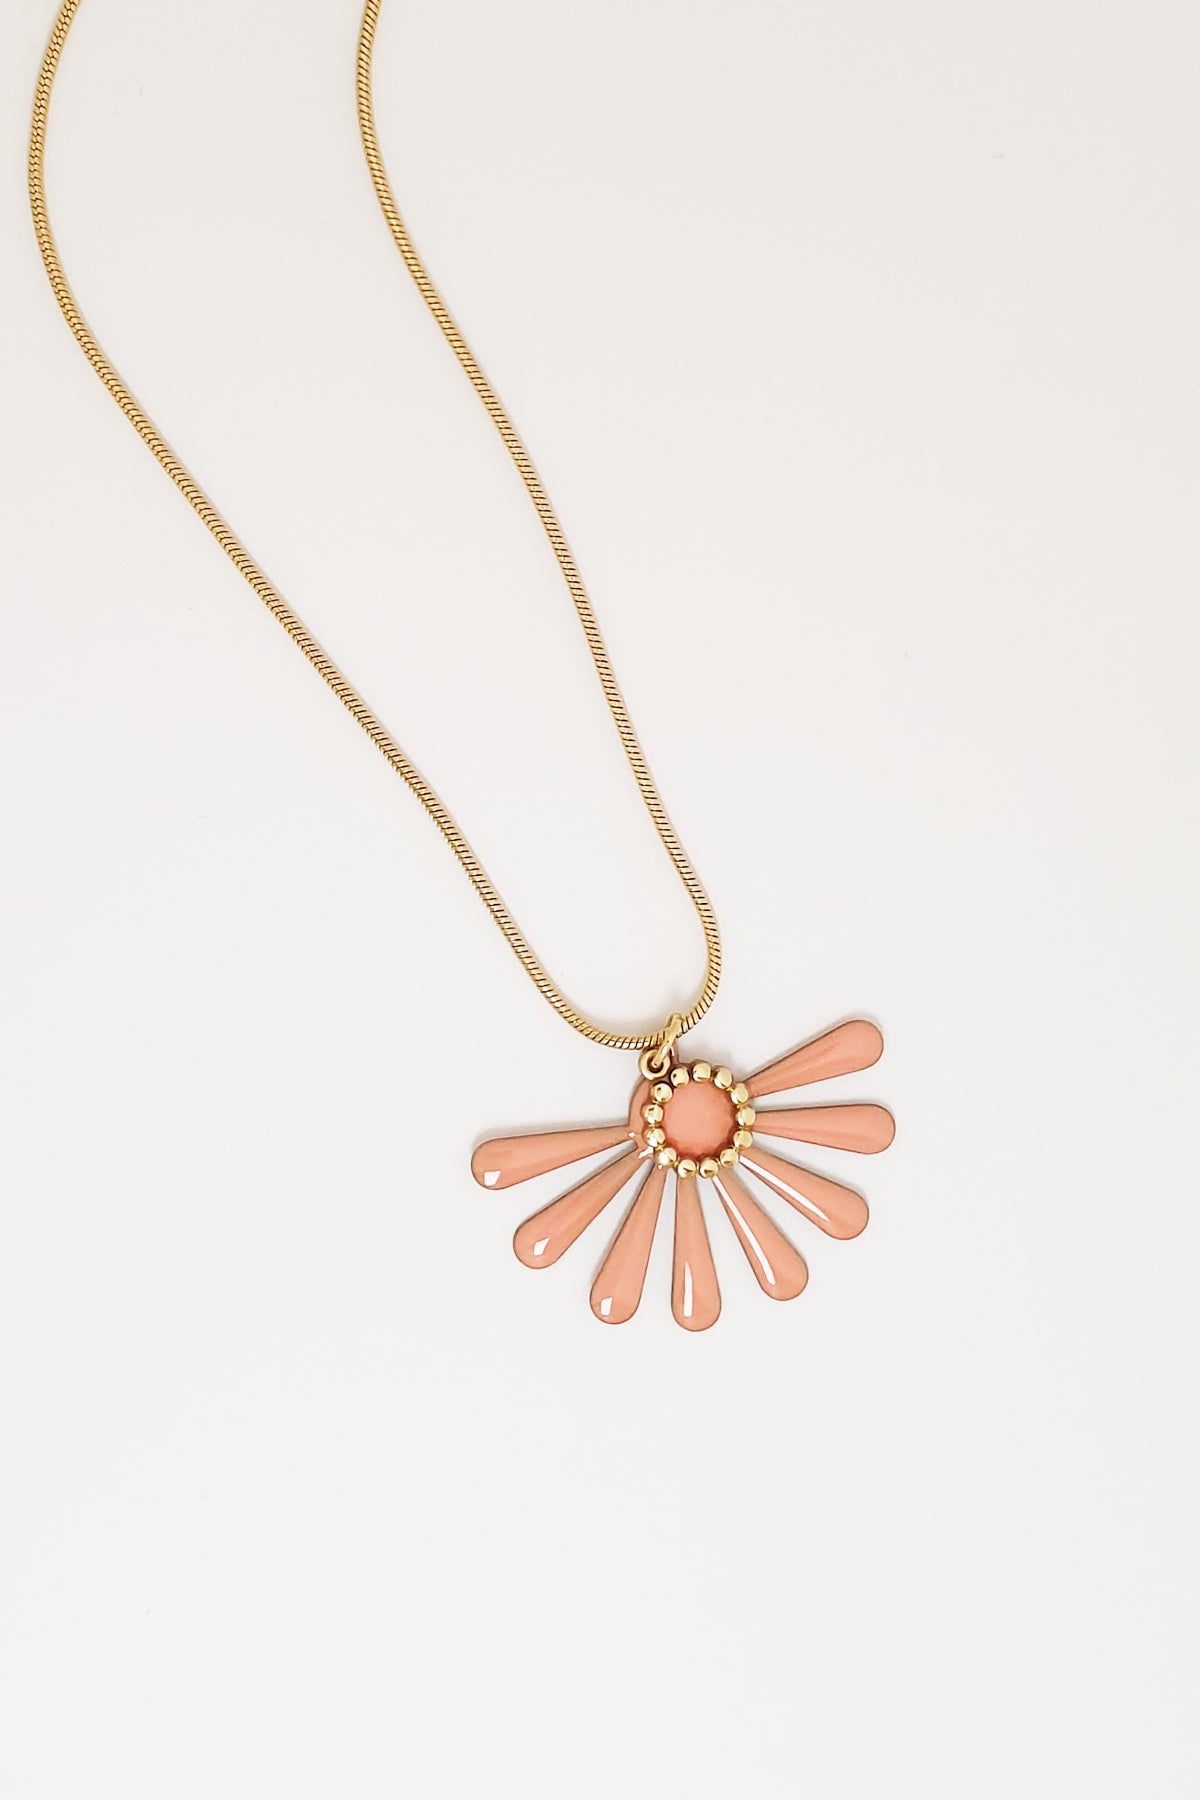 A necklace sits against a white background. It features a gold chain and an apricot coloured floral enamel shape. A tiny brass ring encircles the disk of the floral enamel piece.